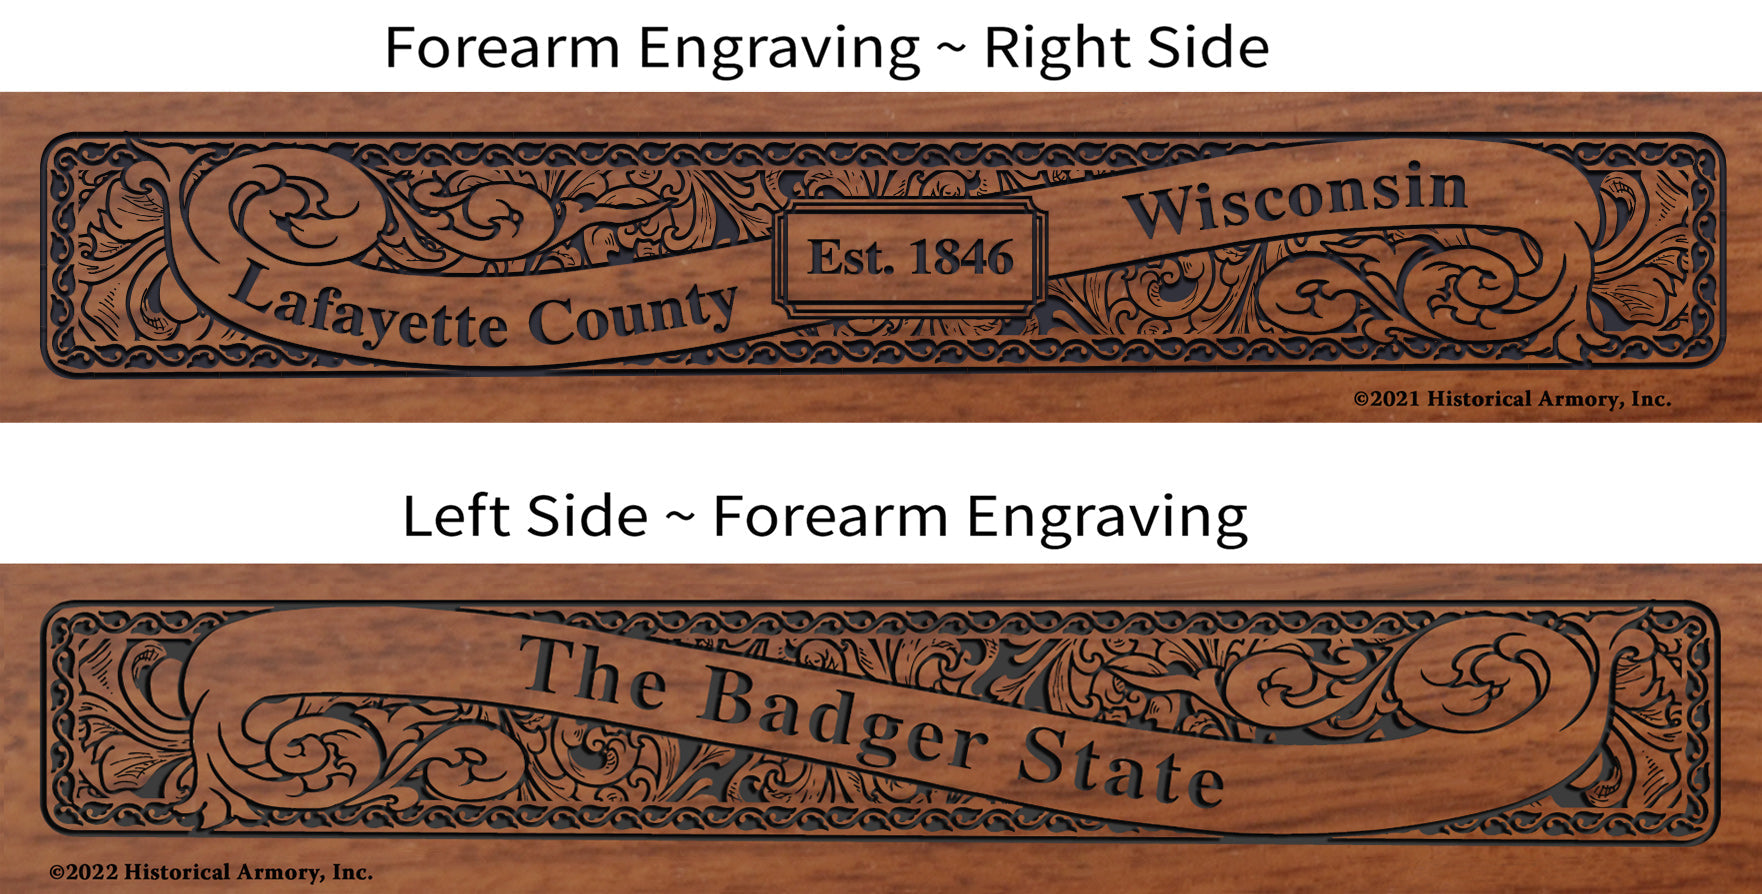 Lafayette County Wisconsin Engraved Rifle Forearm